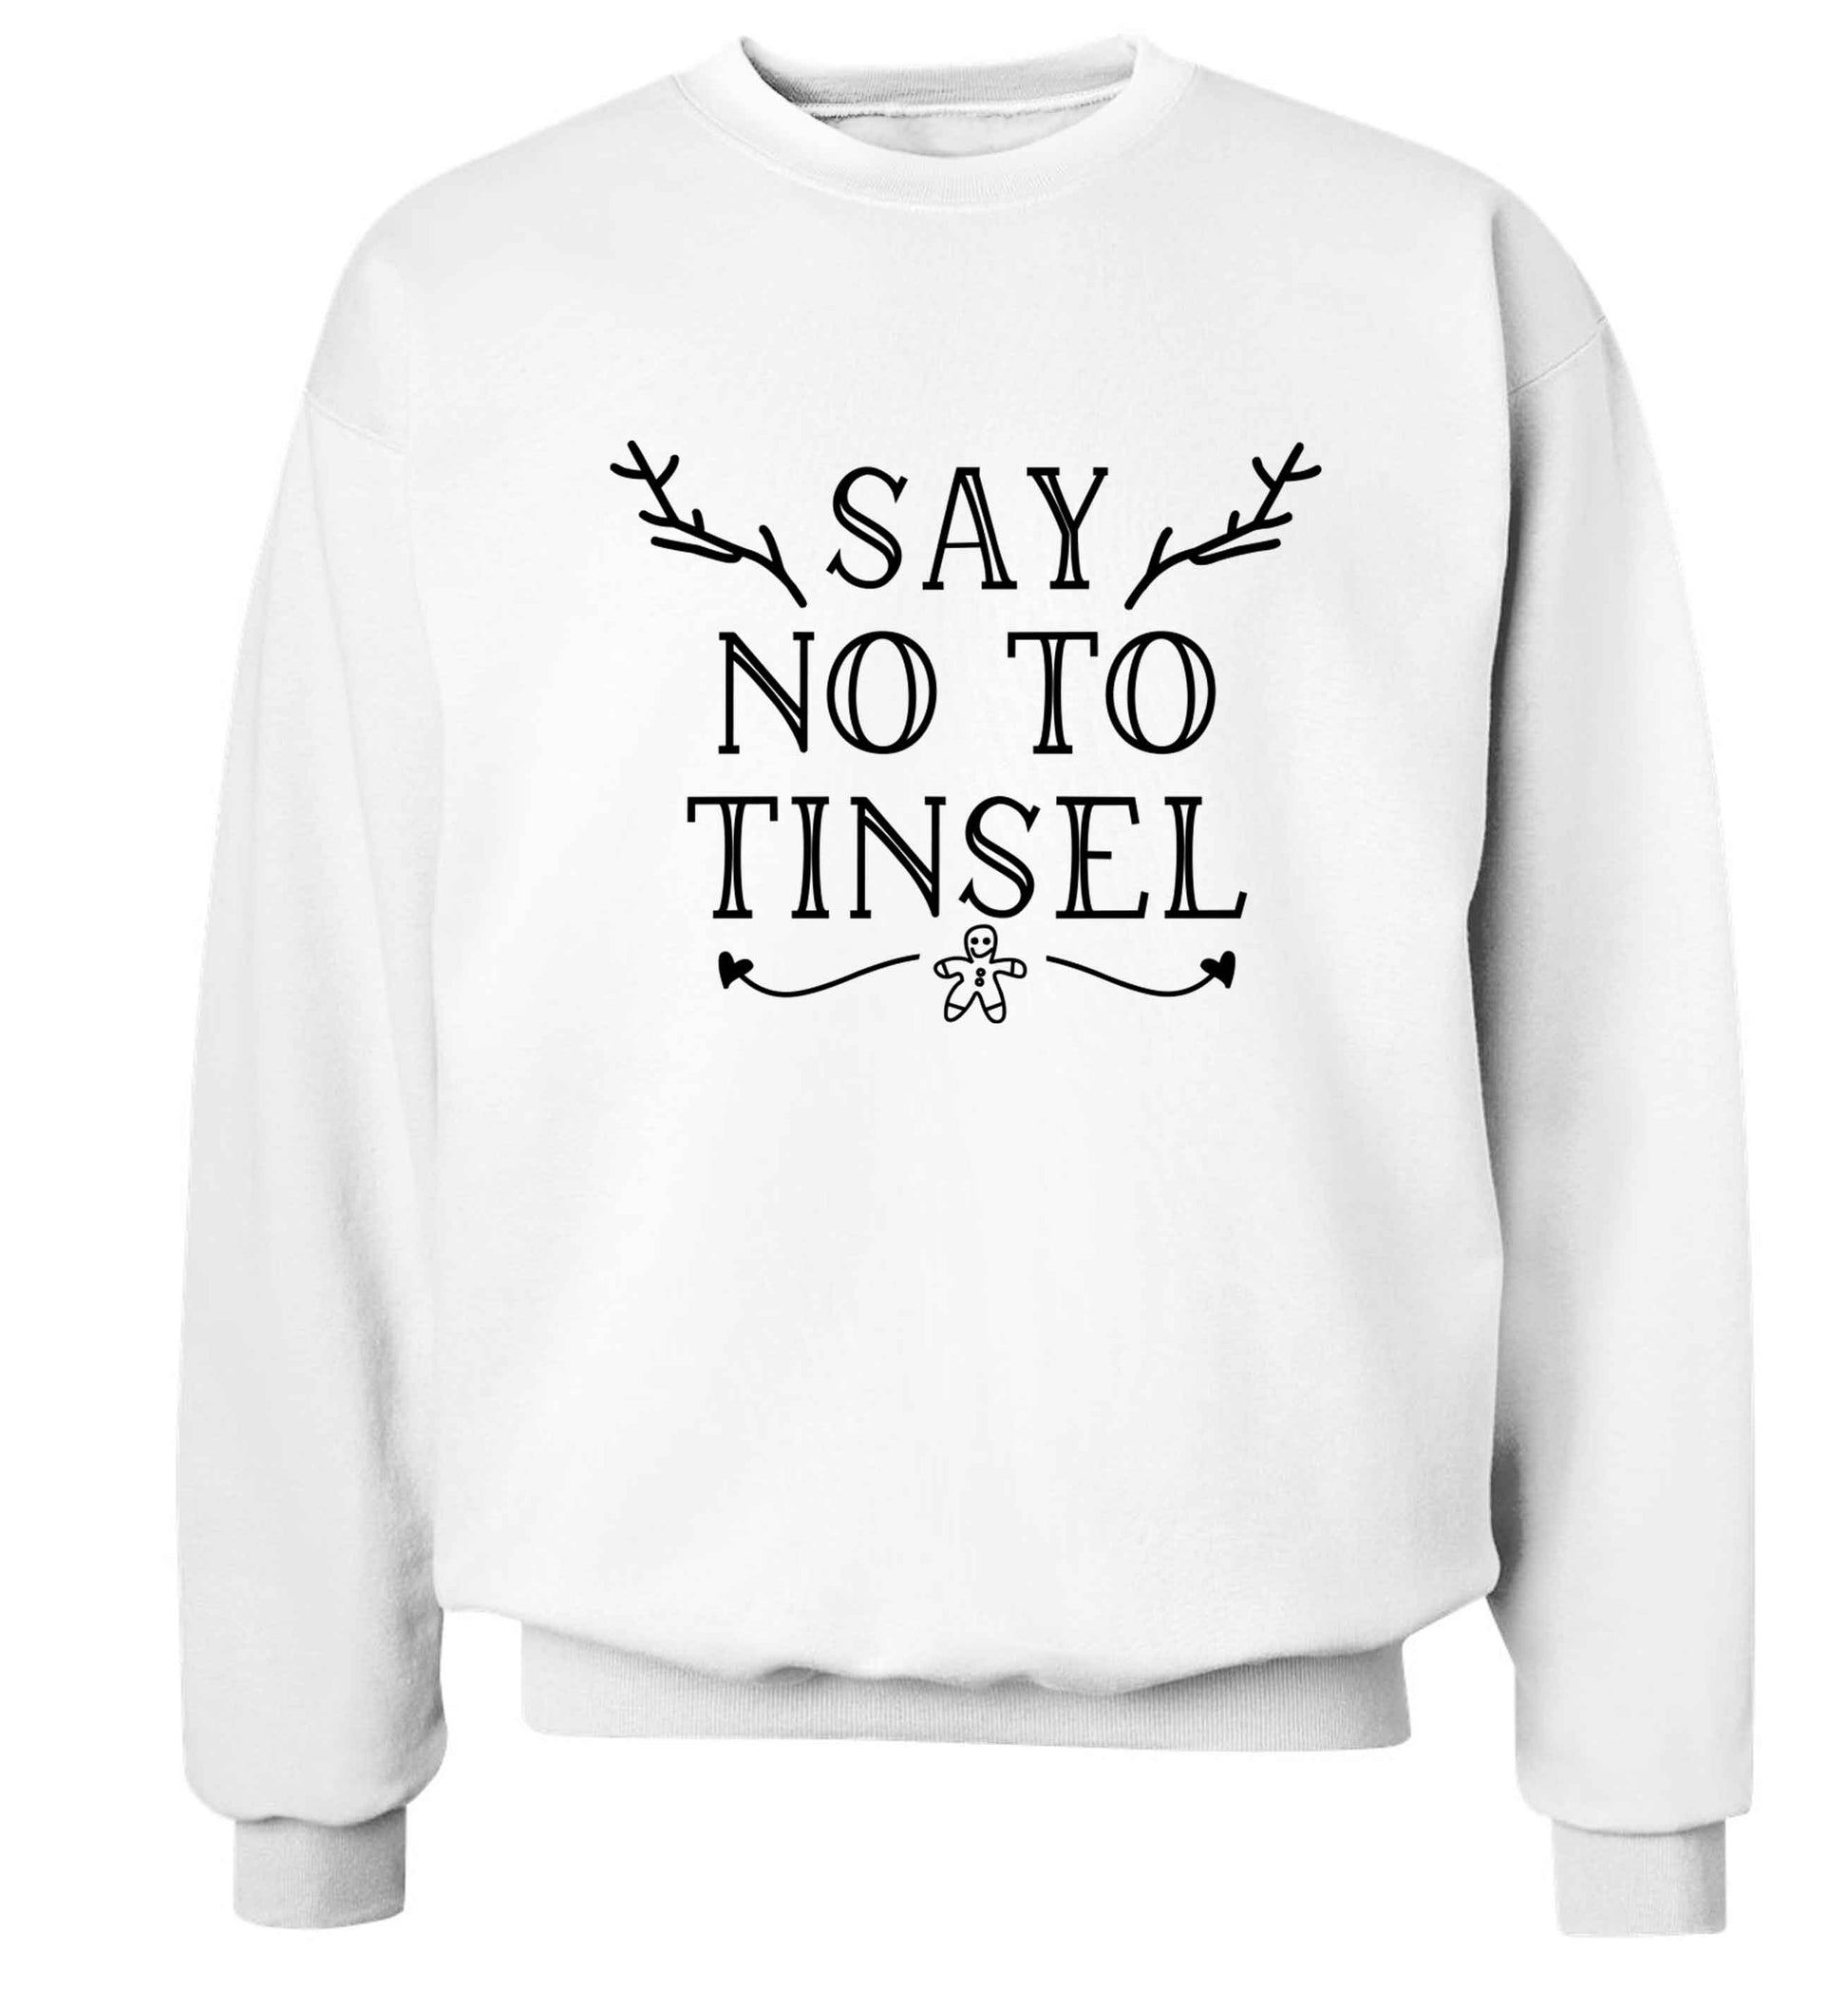 Say no to tinsel Adult's unisex white Sweater 2XL